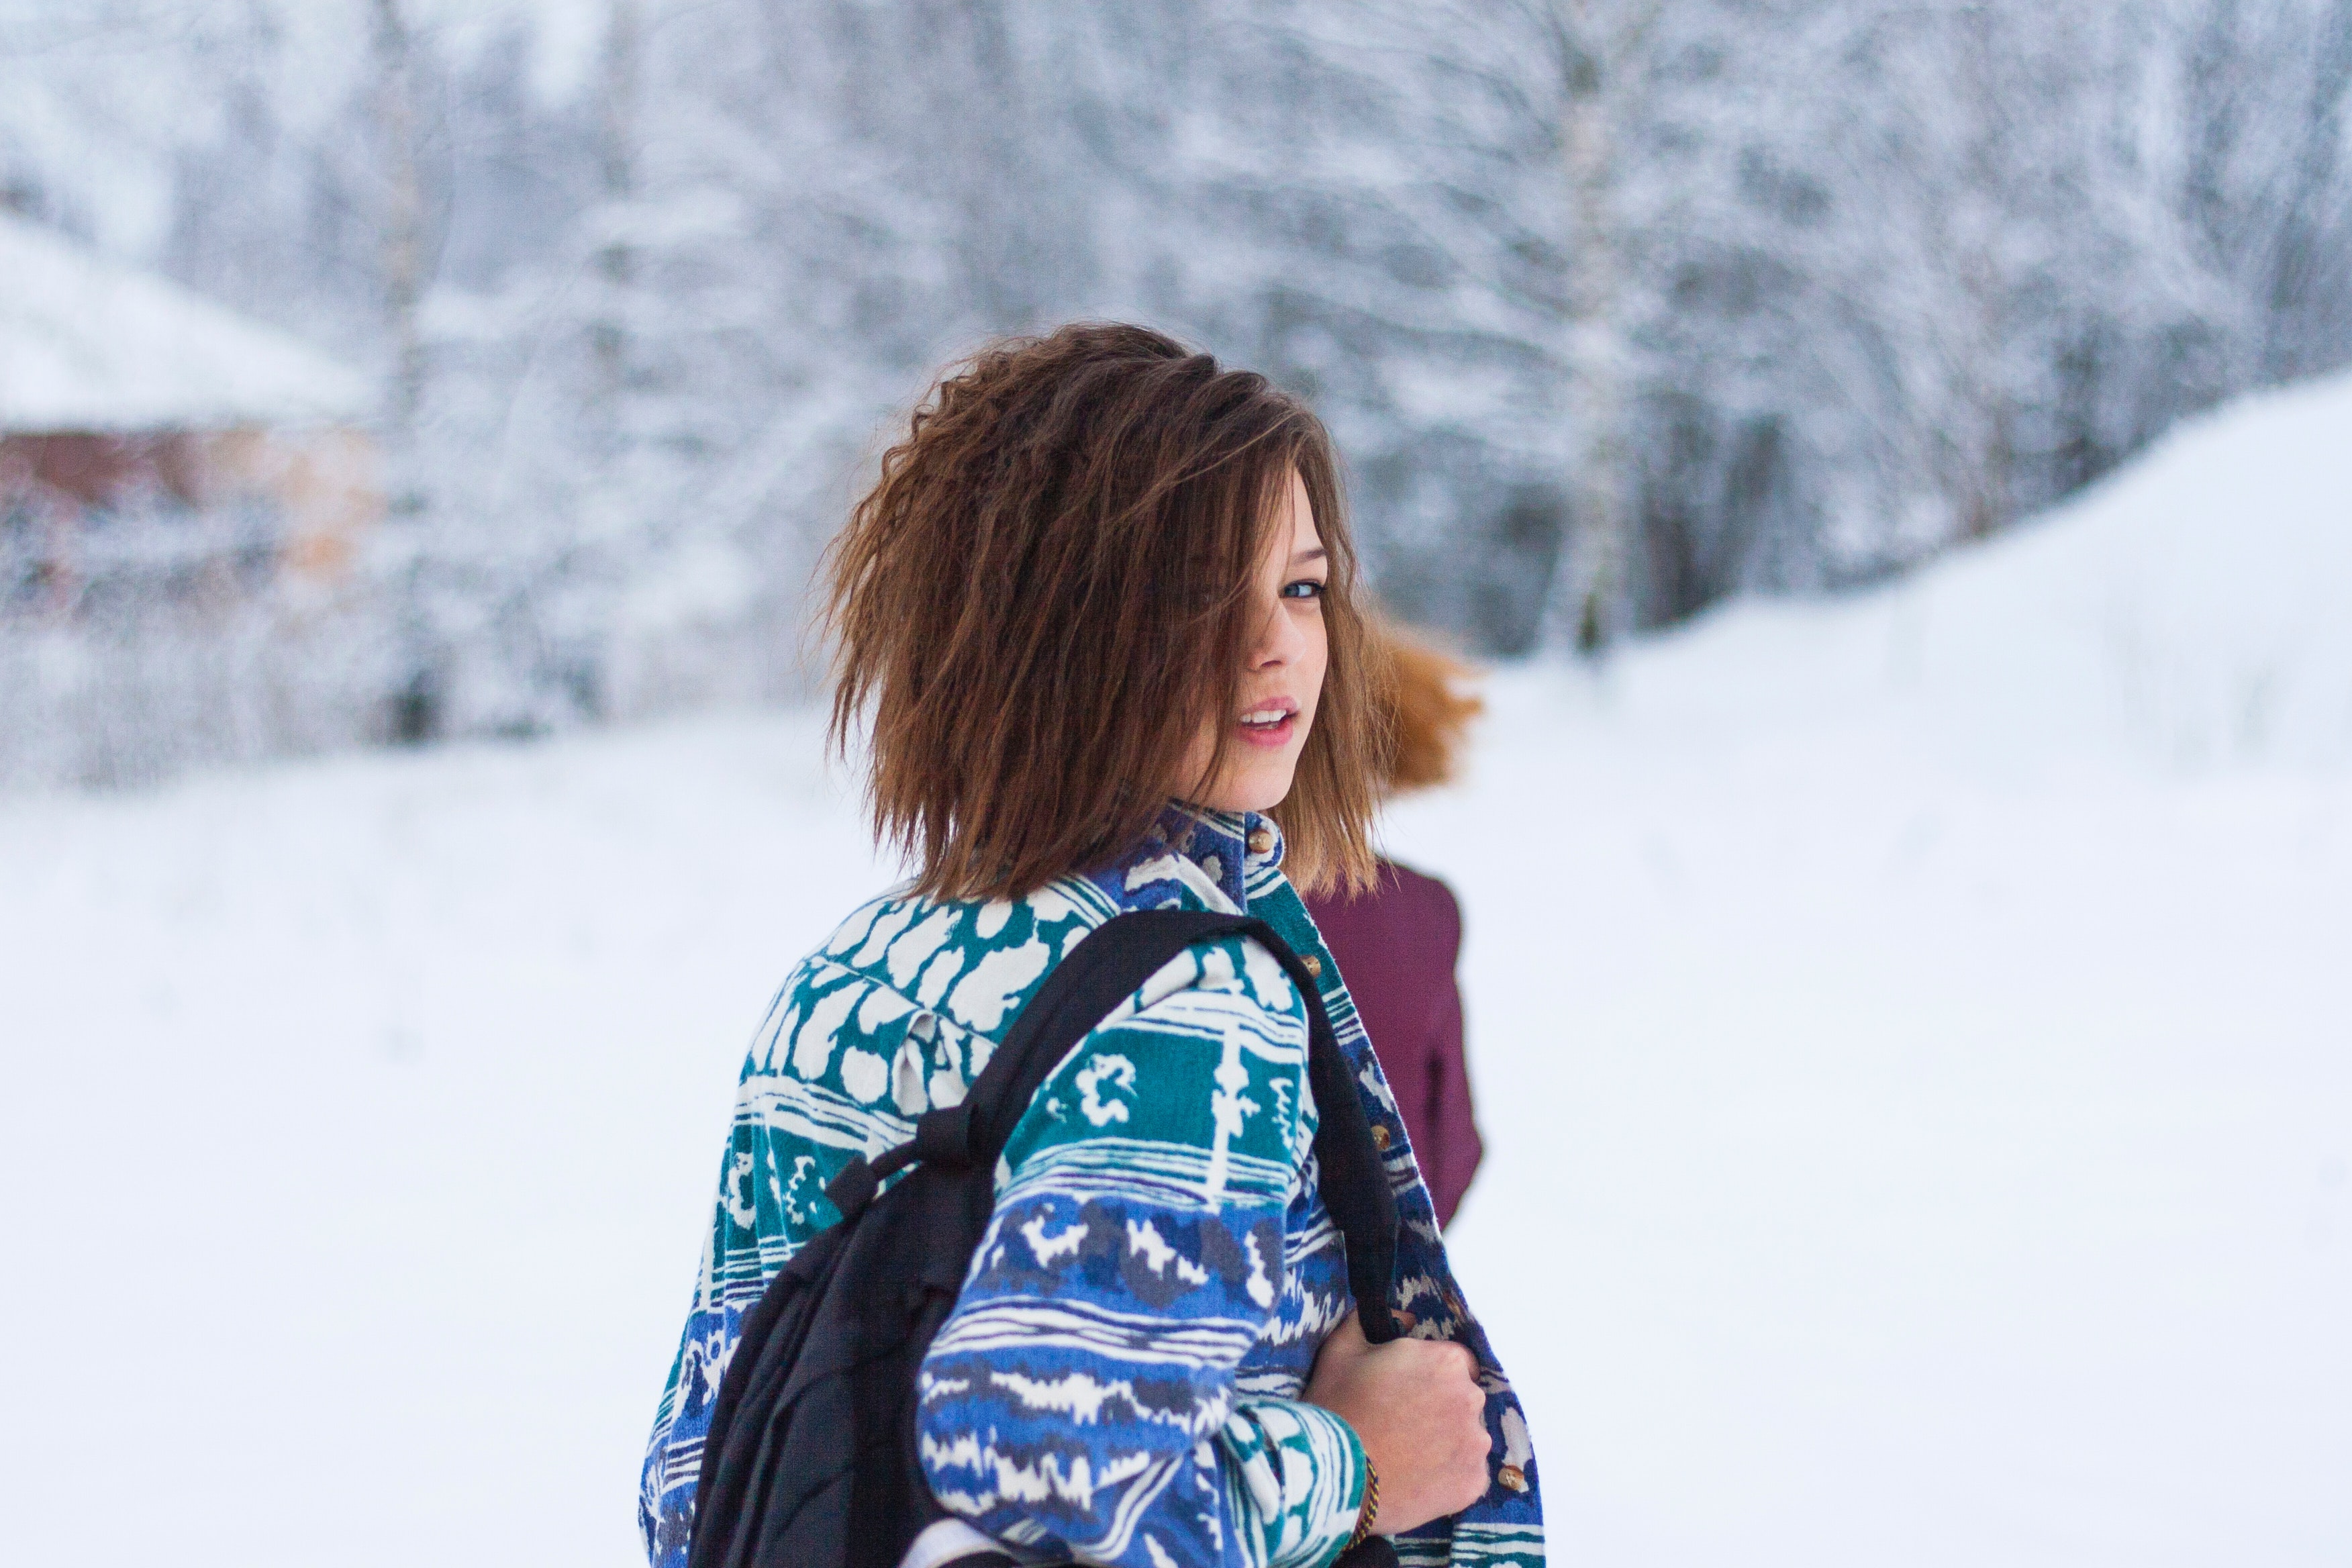 Selective focus portrait photograph of woman wearing blue, green, and white tribal jacket and black backpack outfit